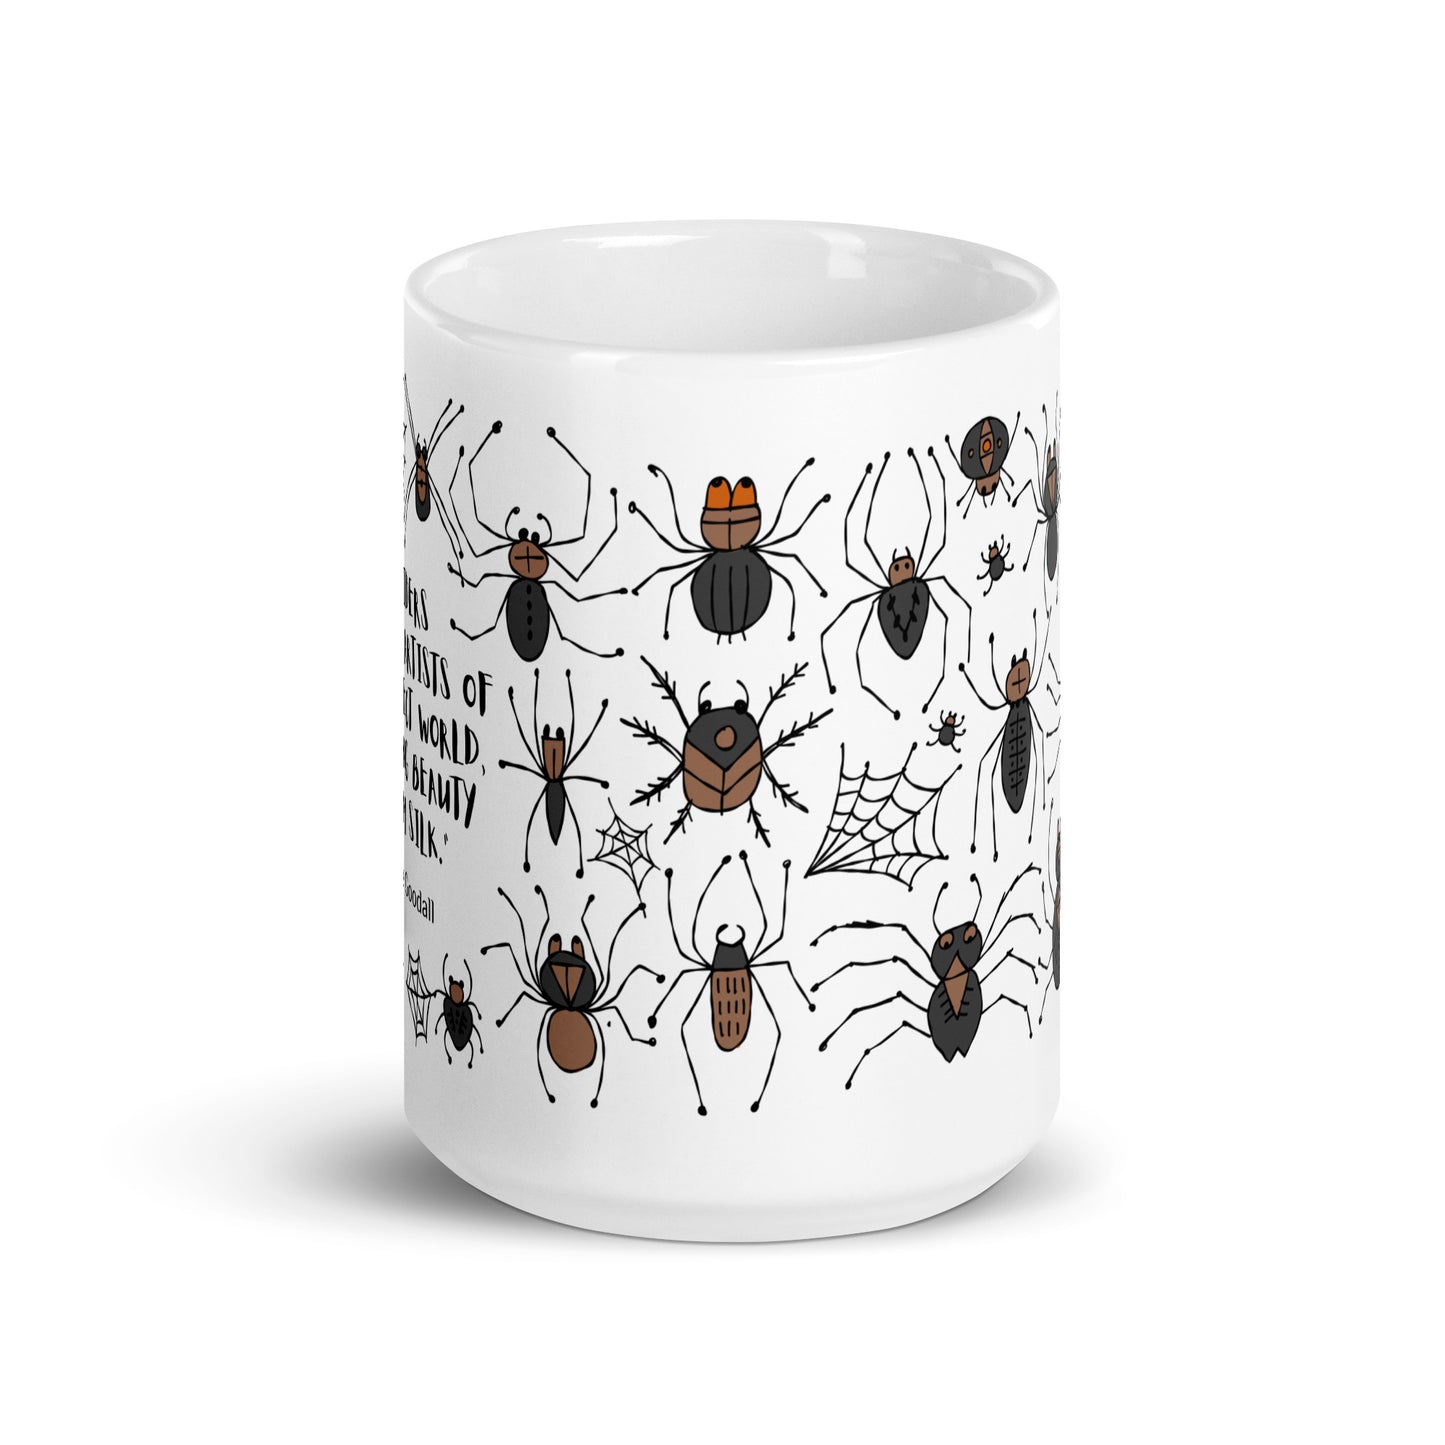 Personalised Ceramic mug 15oz spiders for Arachnologist. Quote on mug: "Spiders are the artists of the insect world, spinning beauty from silk." - Jane Goodall